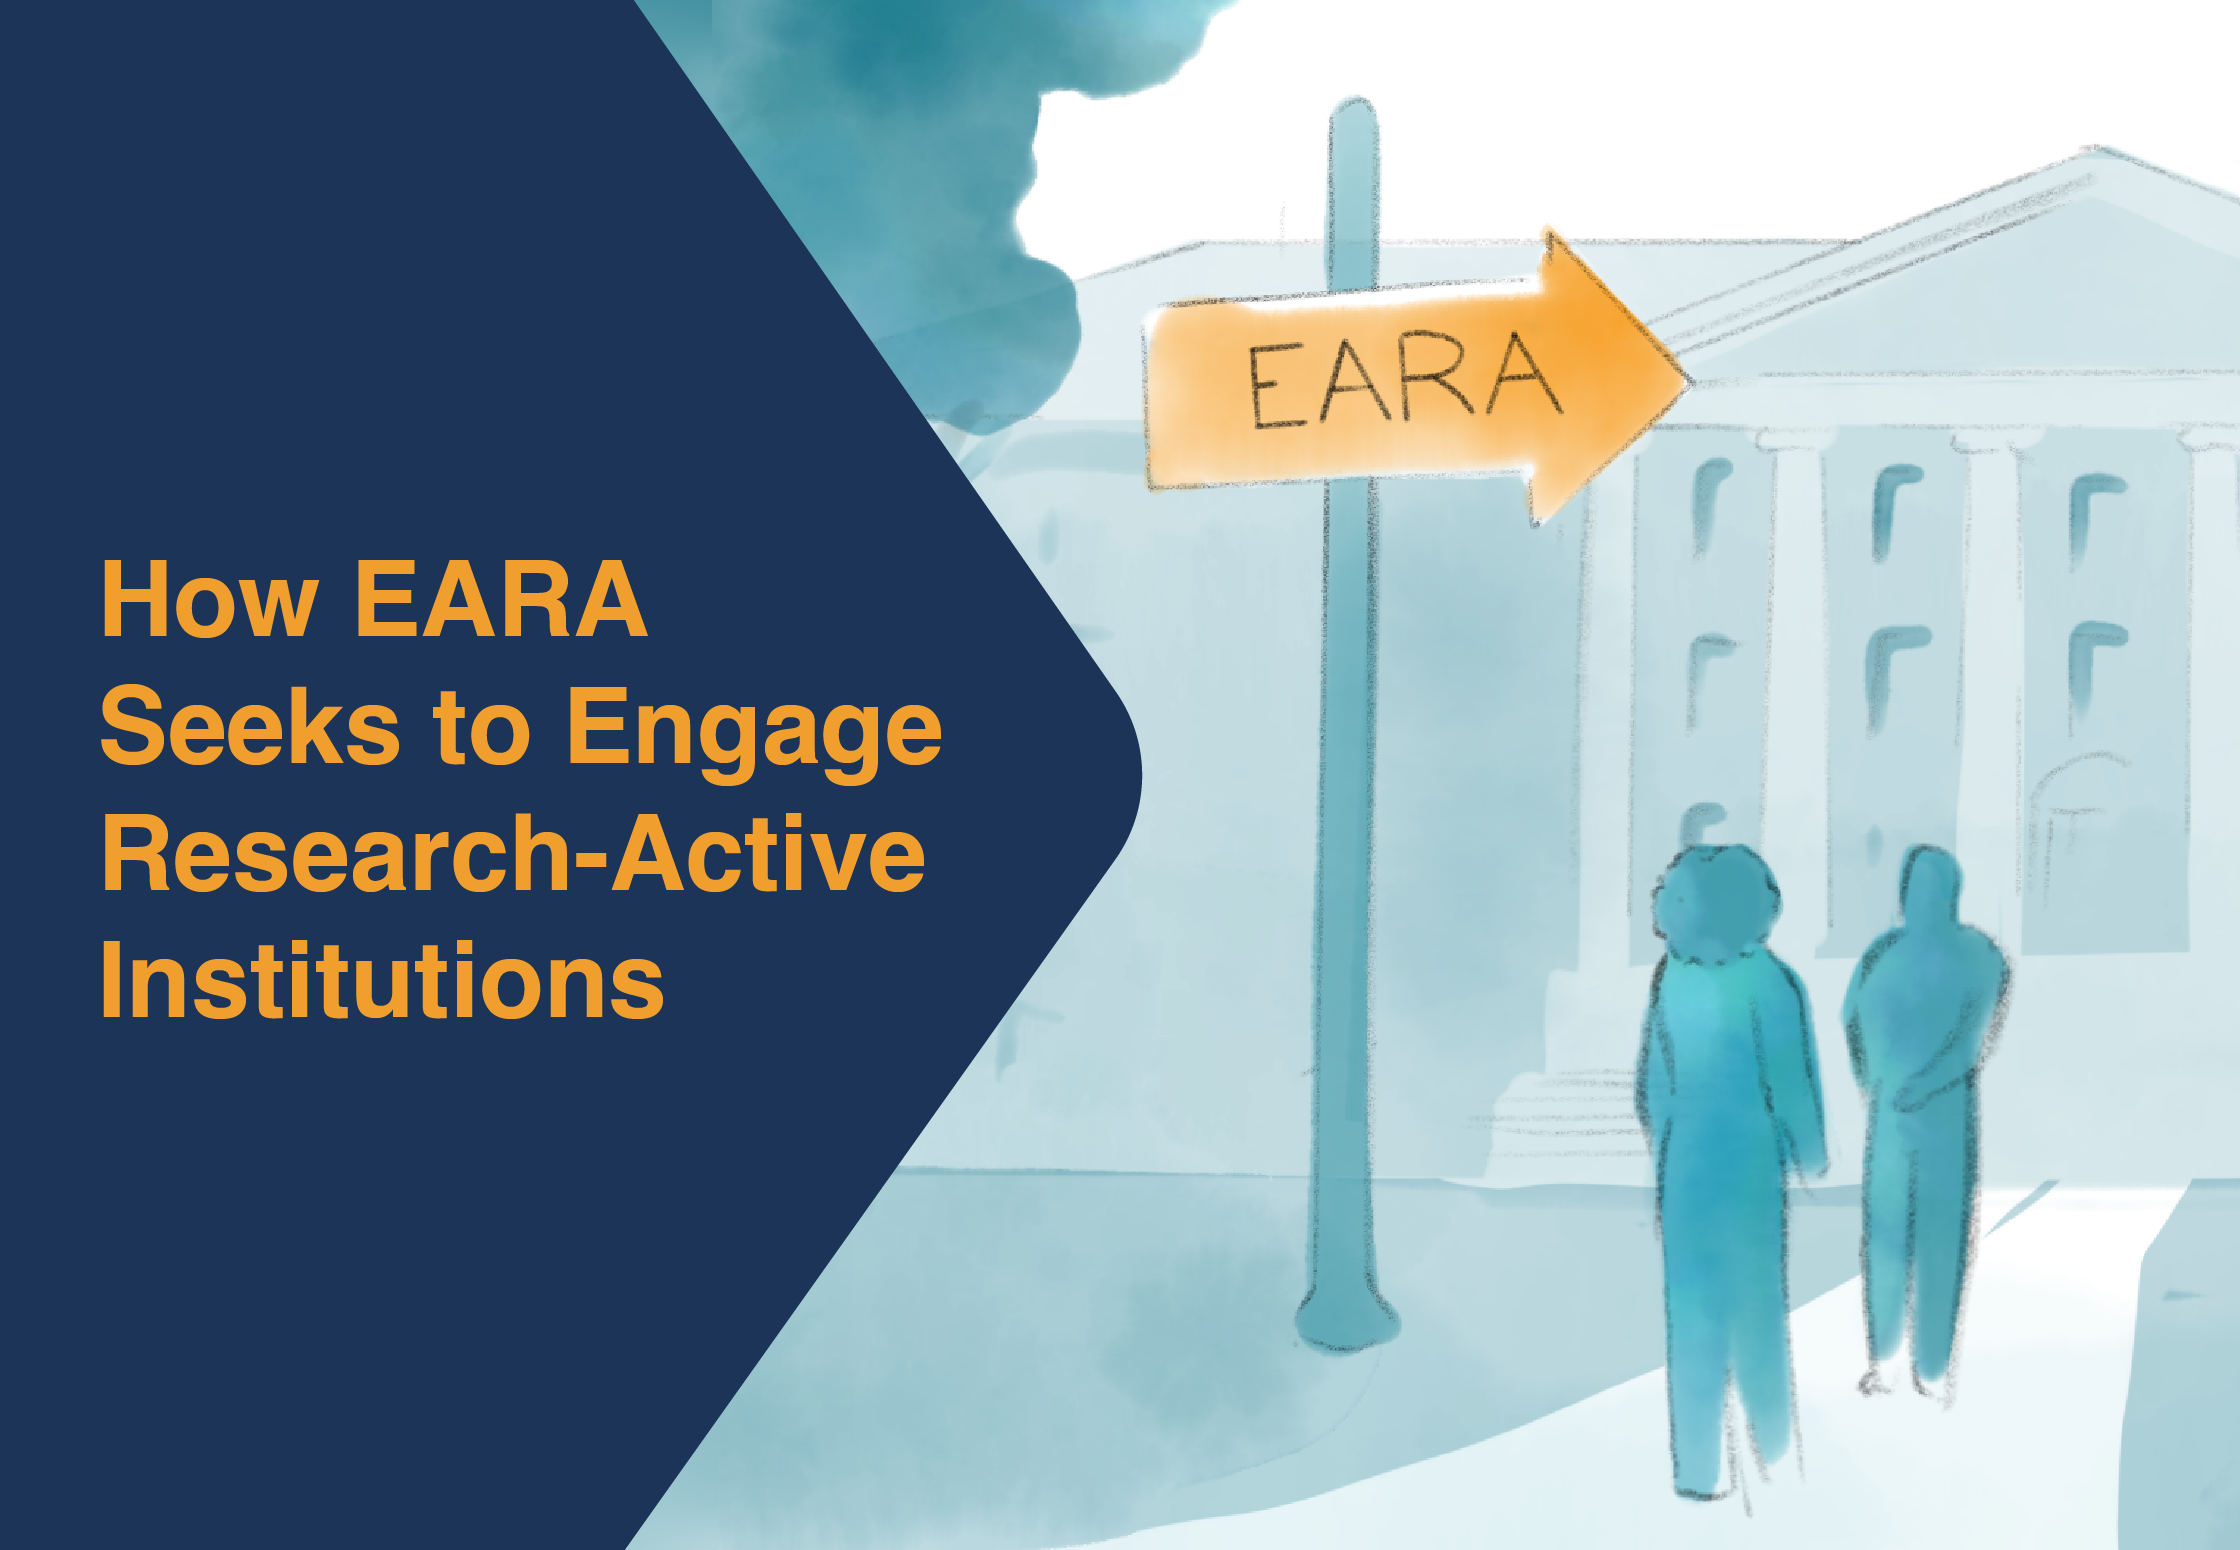 How EARA Seeks to Engage Research-Active Institutions. Watercolor illustration of two people walking down a sidewalk on an academic campus, following an arrow-shaped sign that reads EARA.  